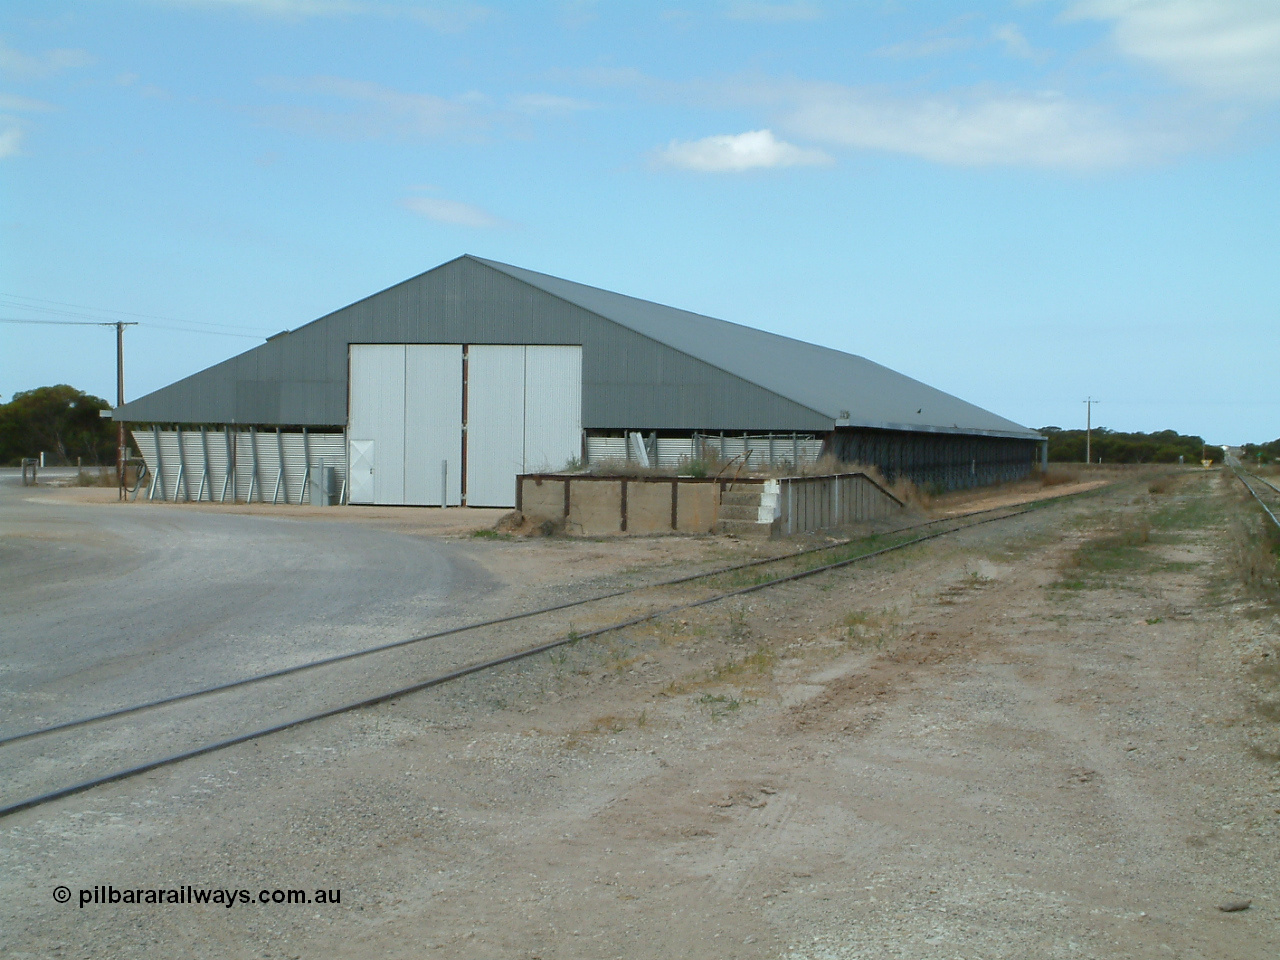 030409 124454
Rudall, horizontal grain bunker with loading ramp in front, crane has been removed.
